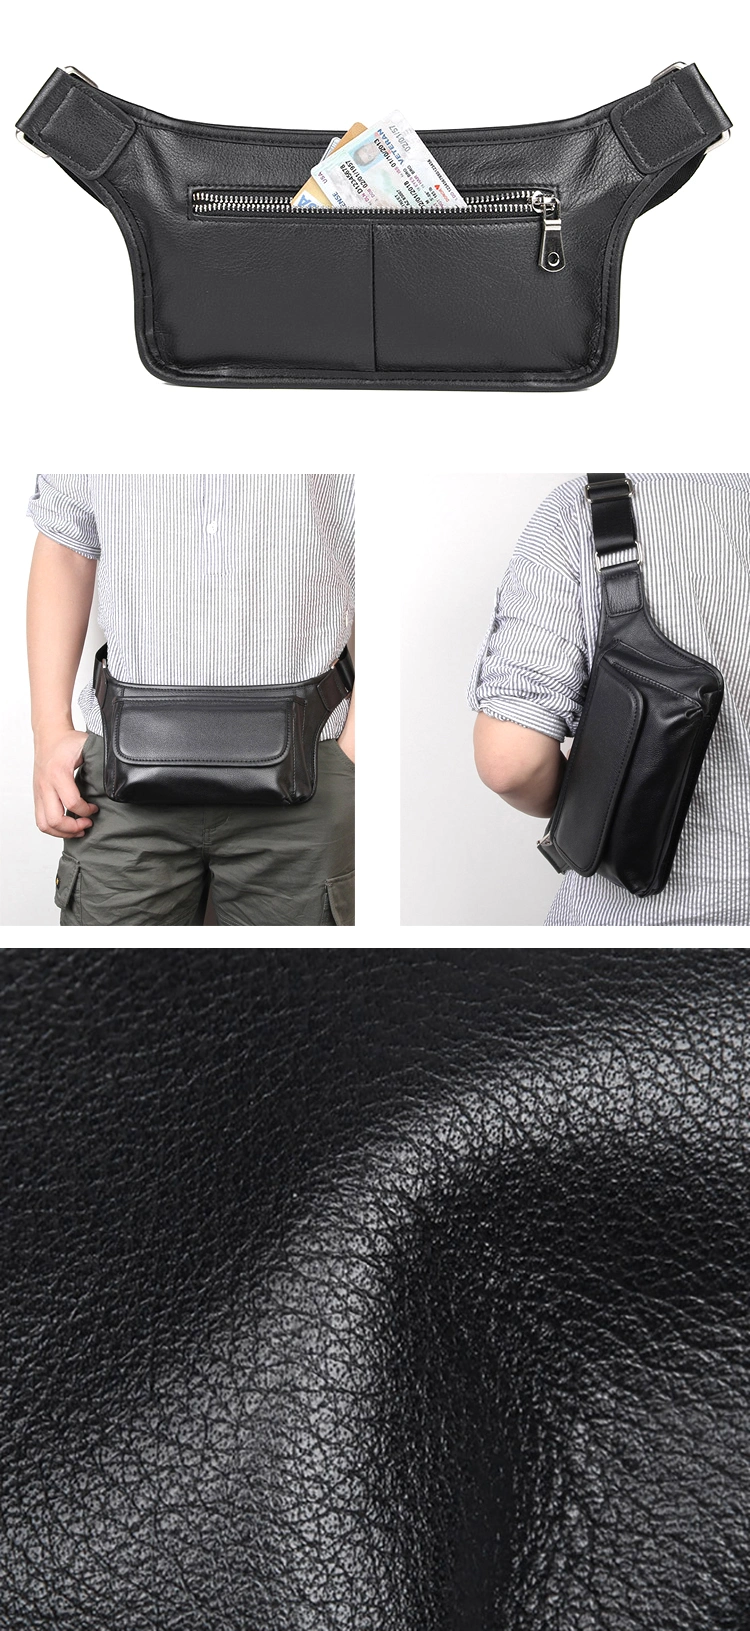 Amazon Hot Selling Black 100% Pure Leather Waist Bag Genuine Leather Fanny Pack for Men